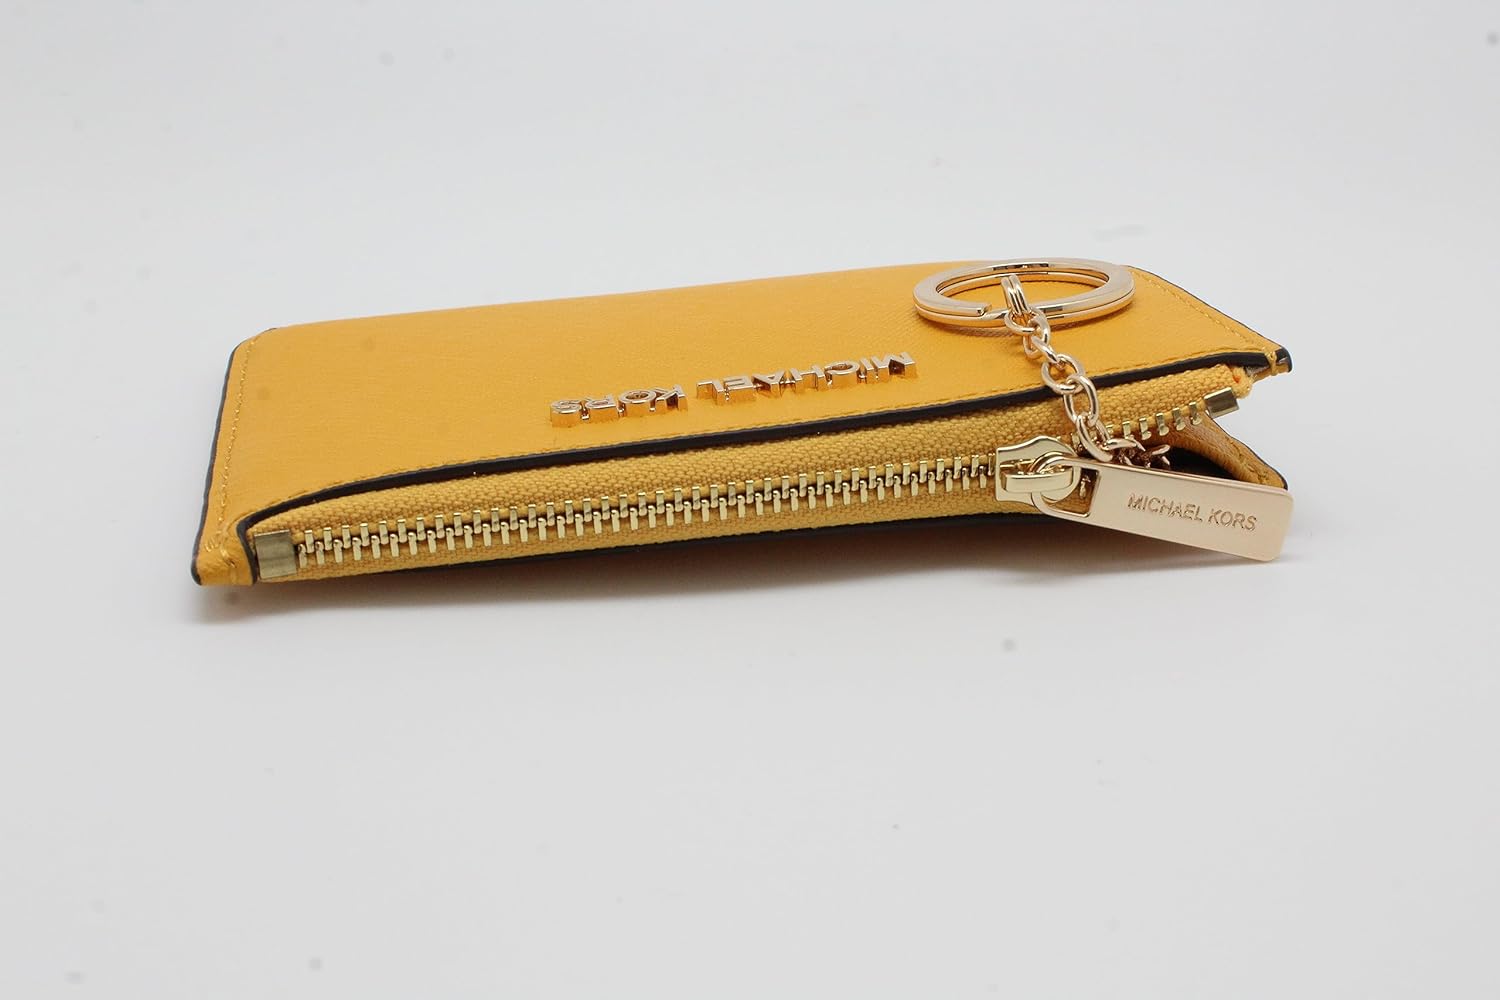 Michael Kors Jet Set Travel Small Top Zip Coin Pouch with ID Holder in Saffiano Leather (Jasmine Yellow, 1) - image 3 of 6